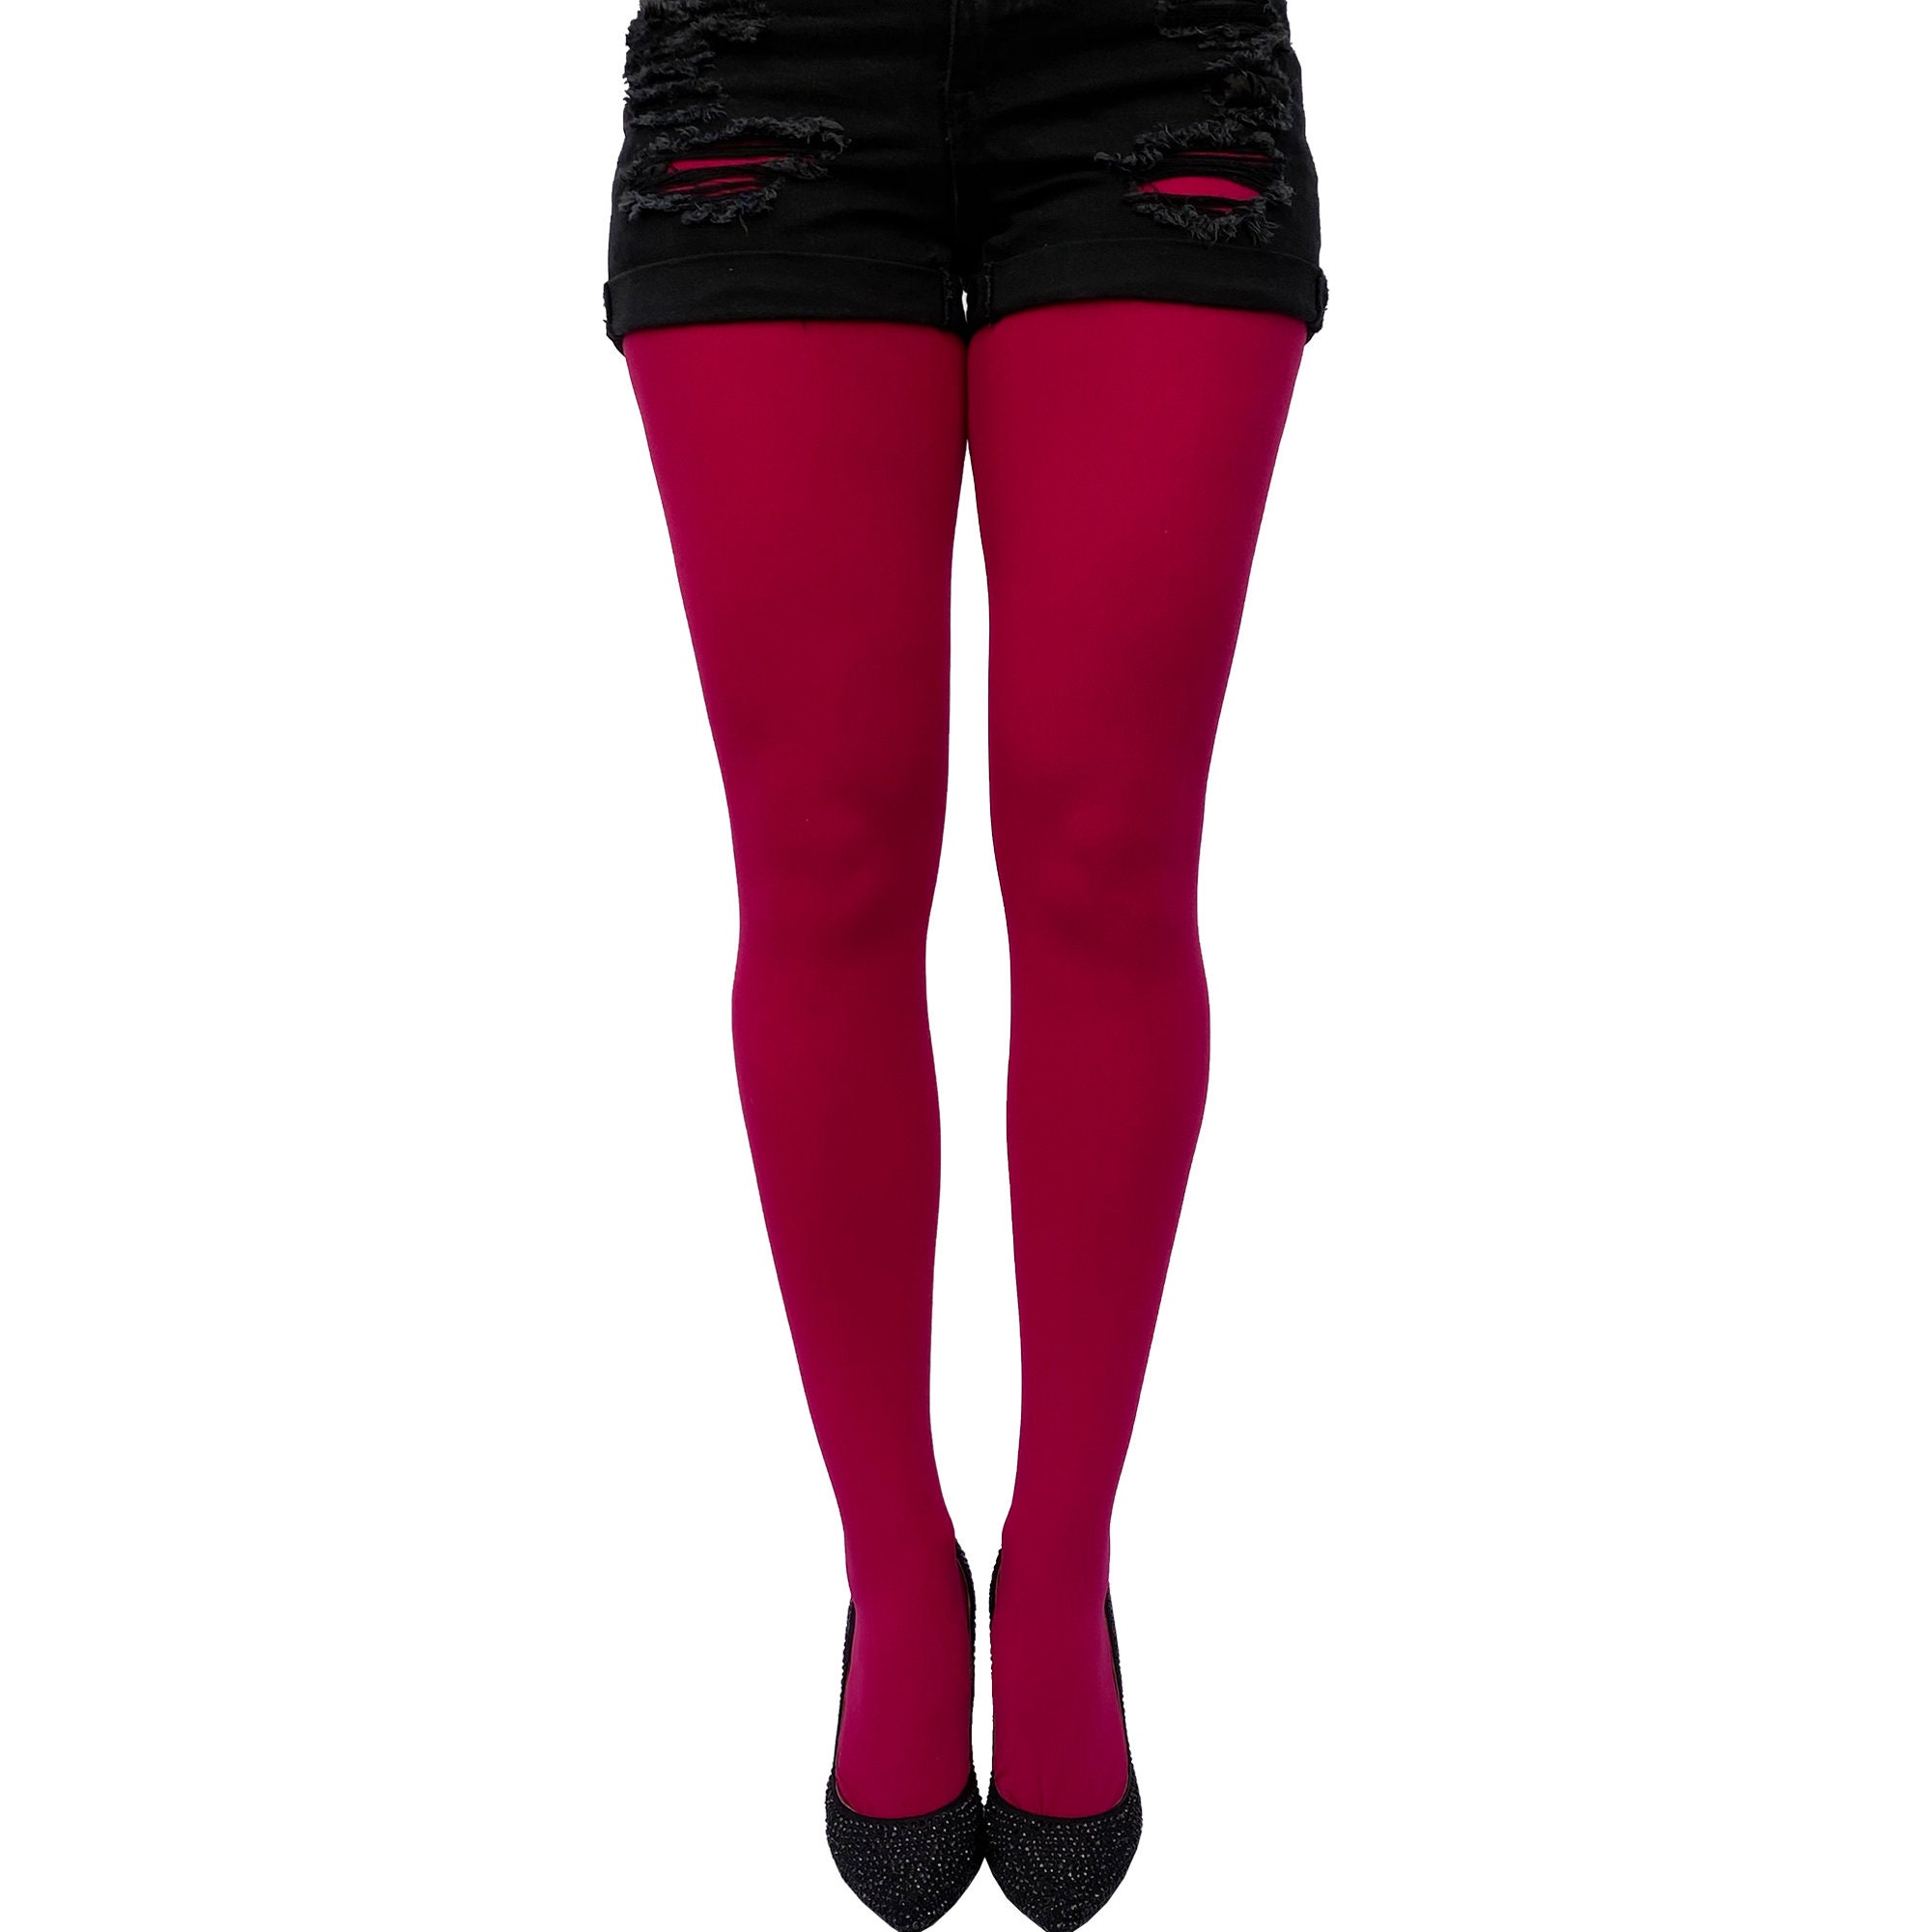 Cherry Pink Tights Opaque for Women Soft & Durable Opaque 80